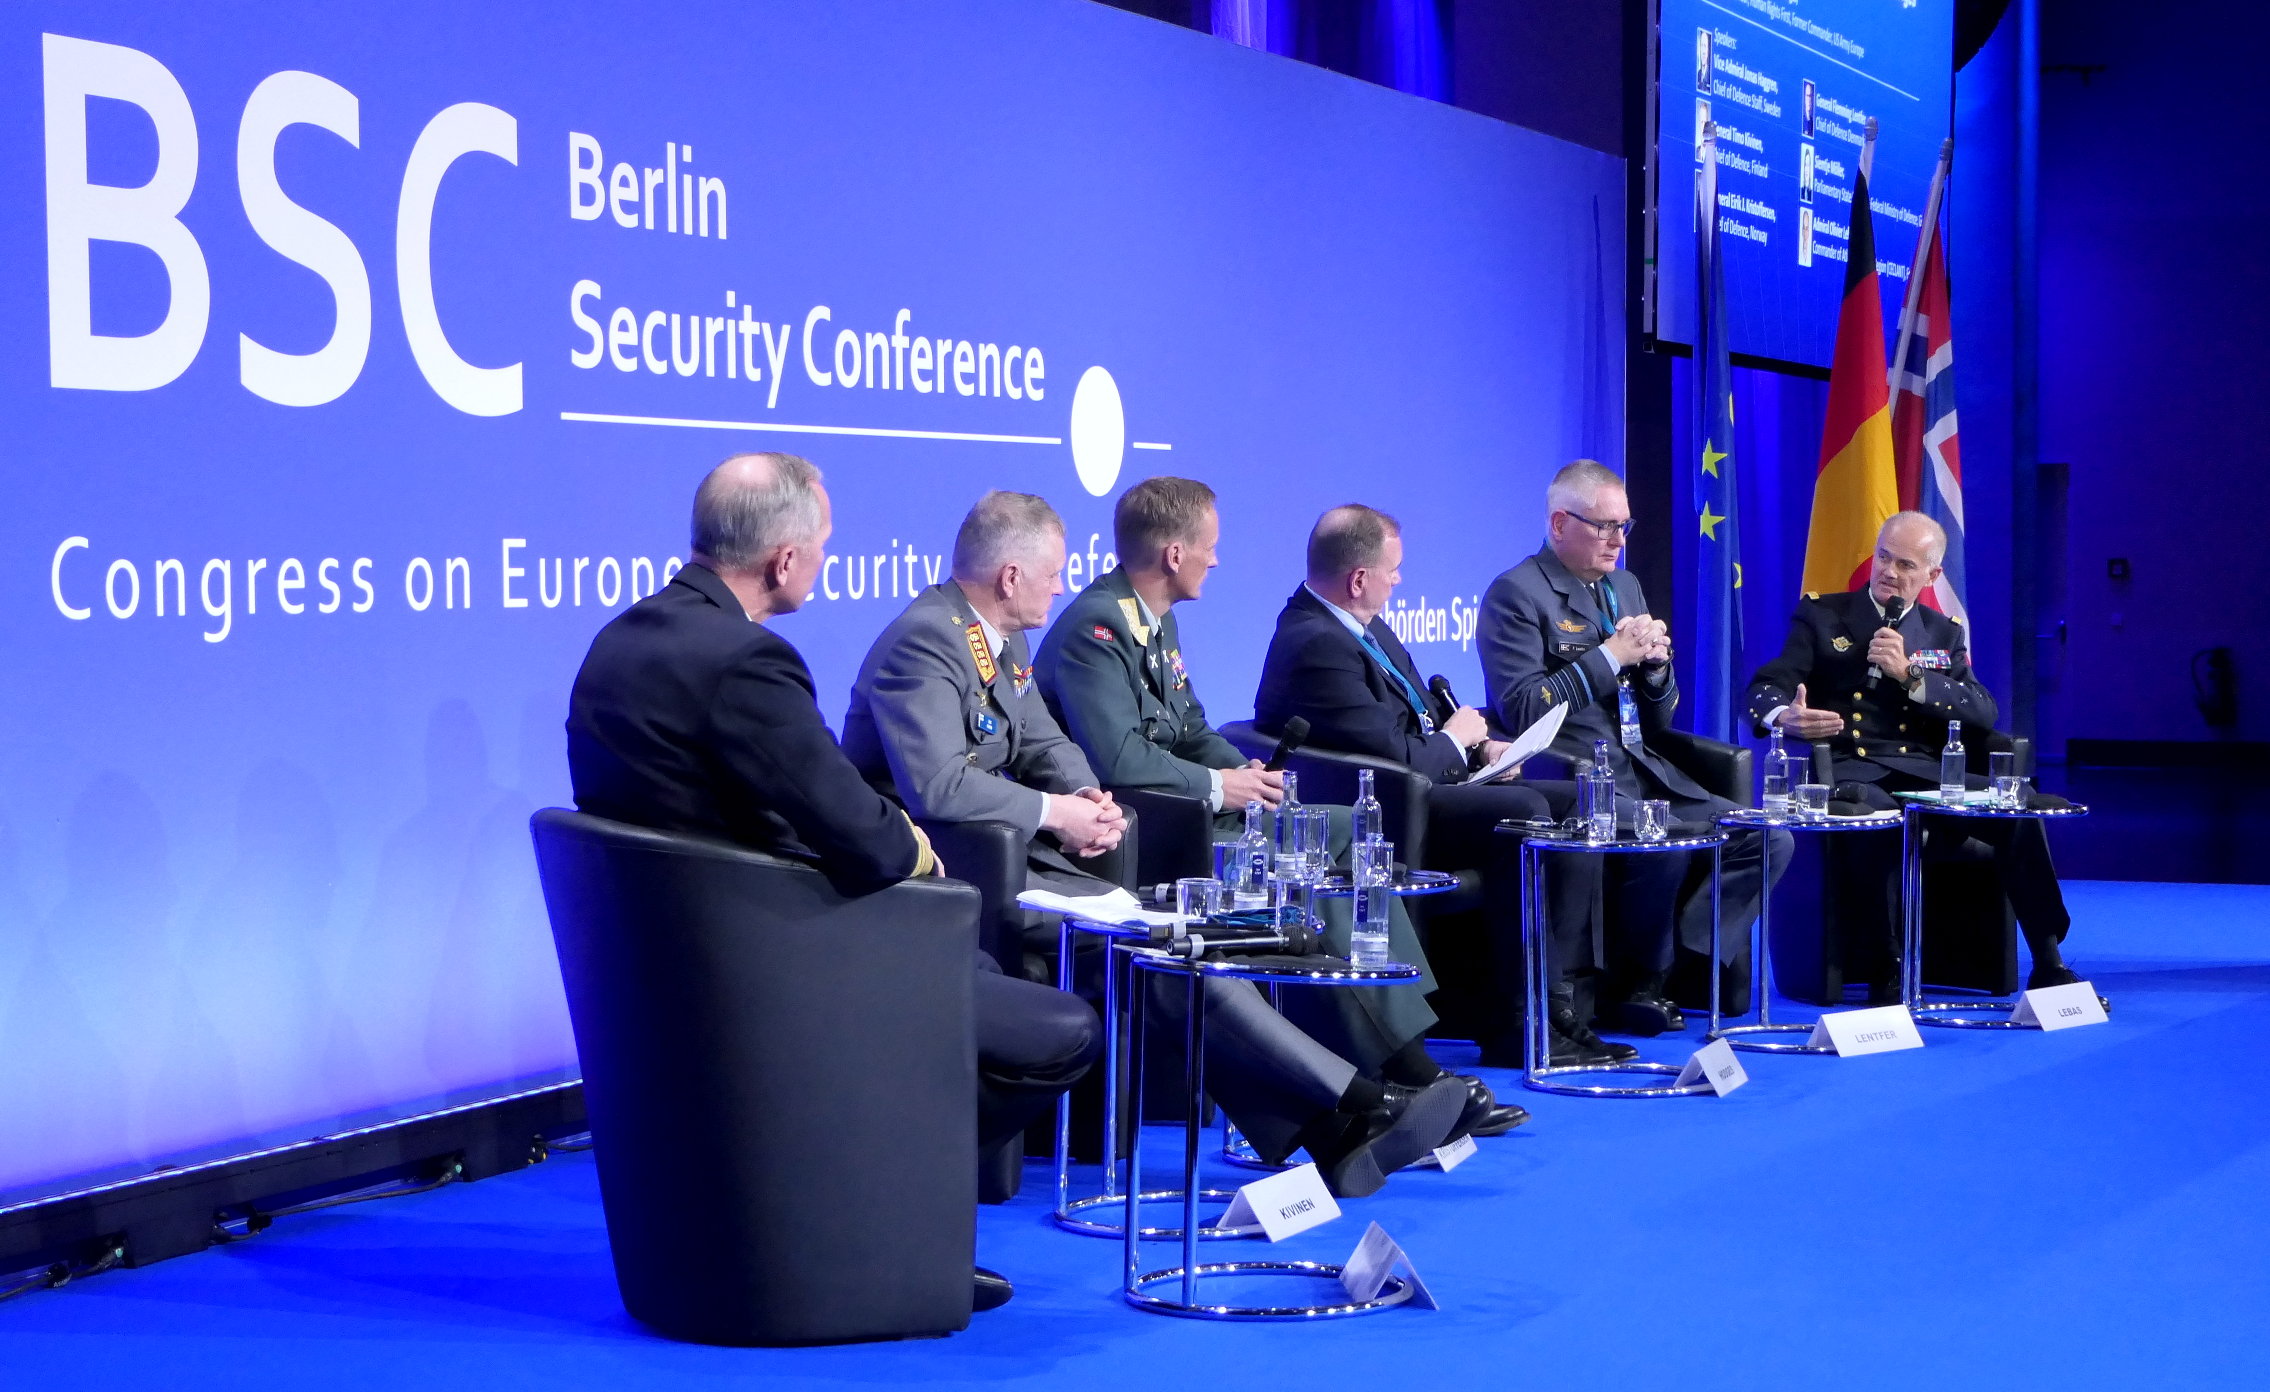 Berlin Security Conference 2022 #BSC22